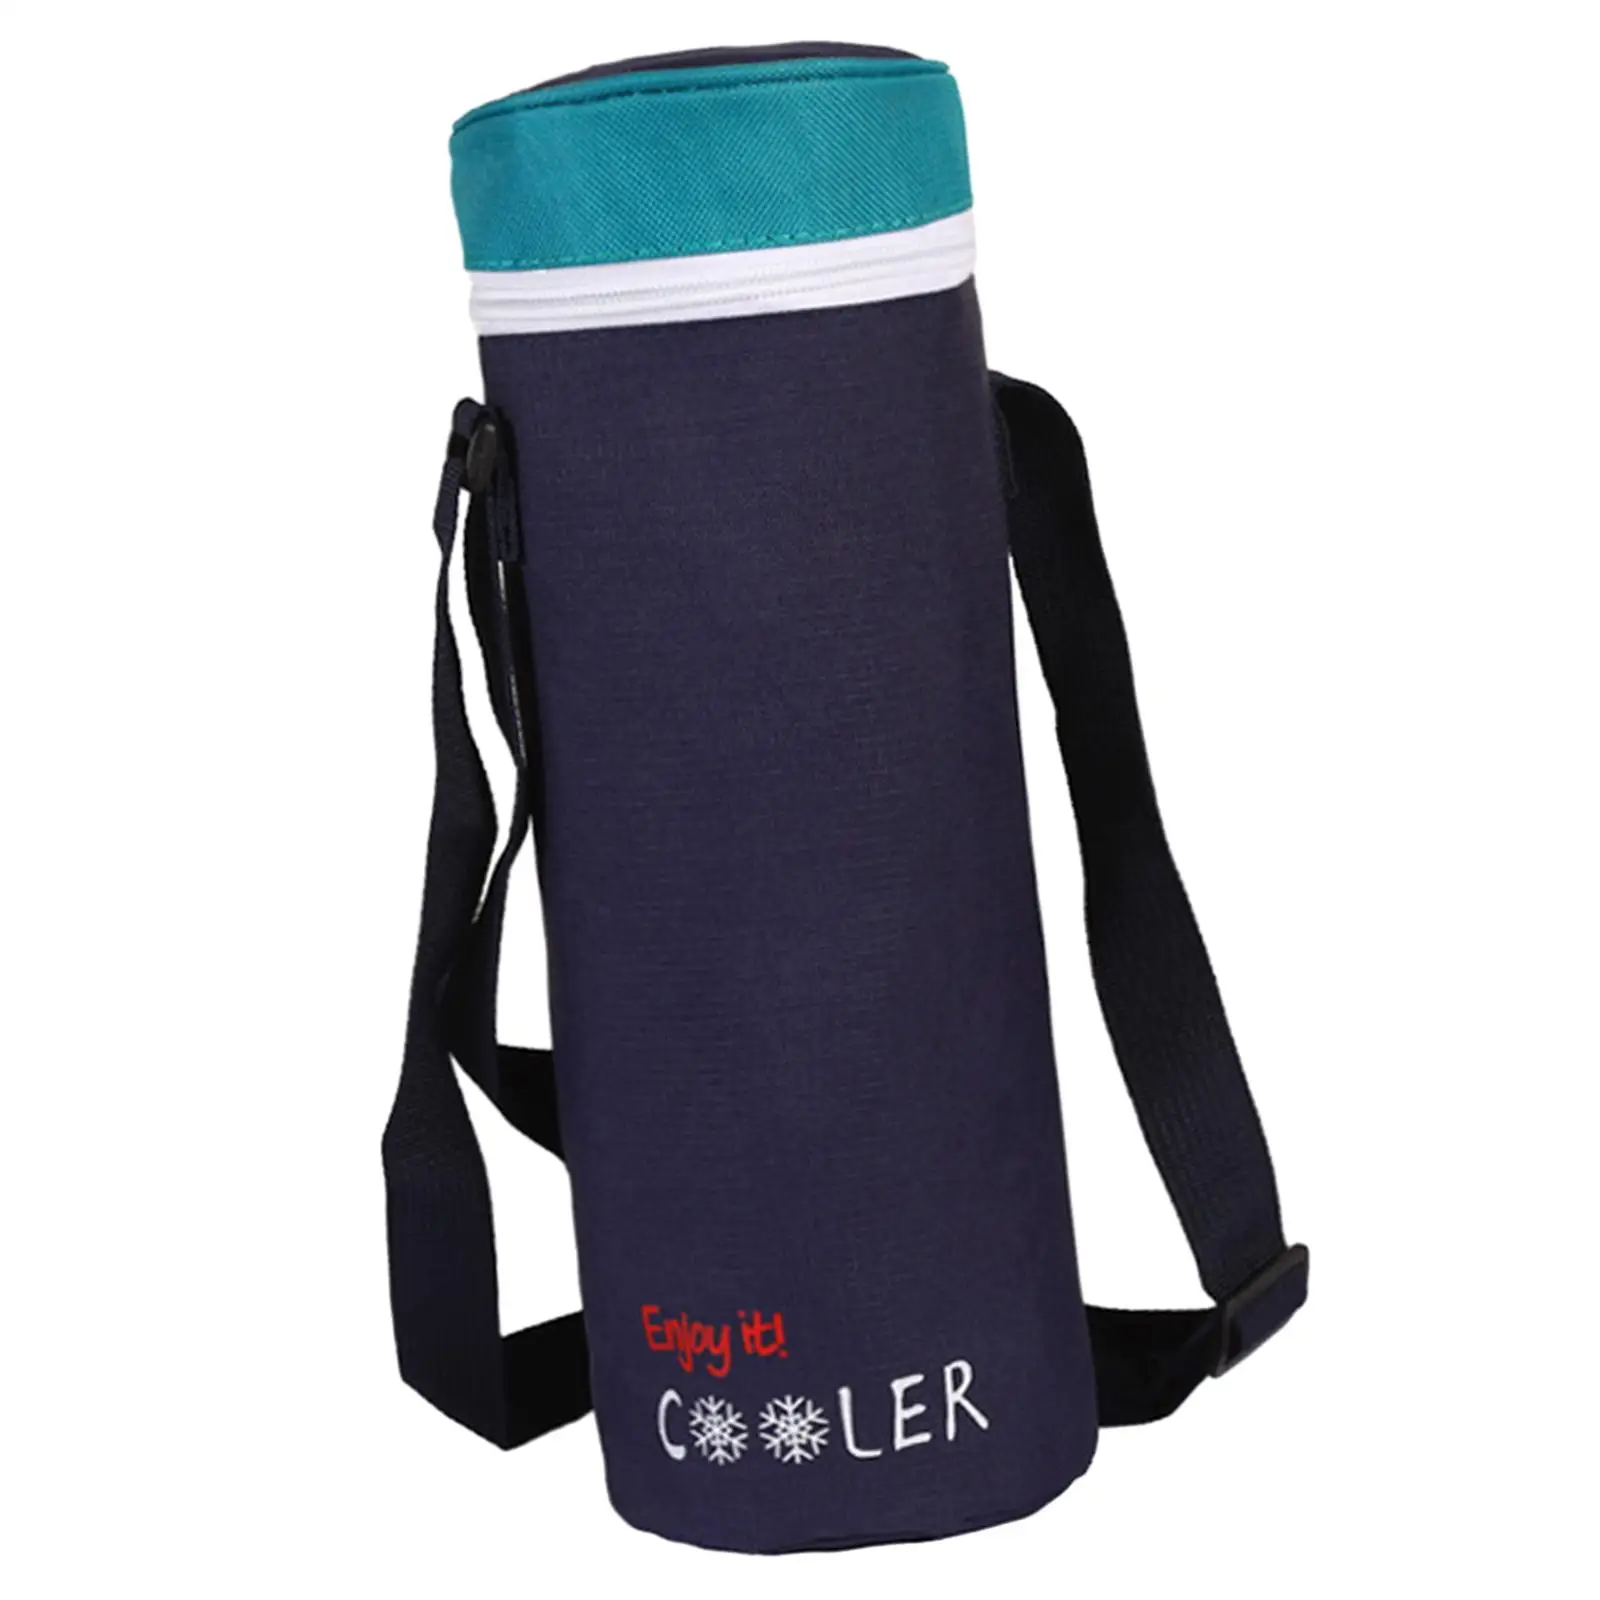 Insulated Water Bottle Carrier Bag with Adjustable Shoulder Strap Cooler Bag Oxford for Running Climbing Travel Picnic